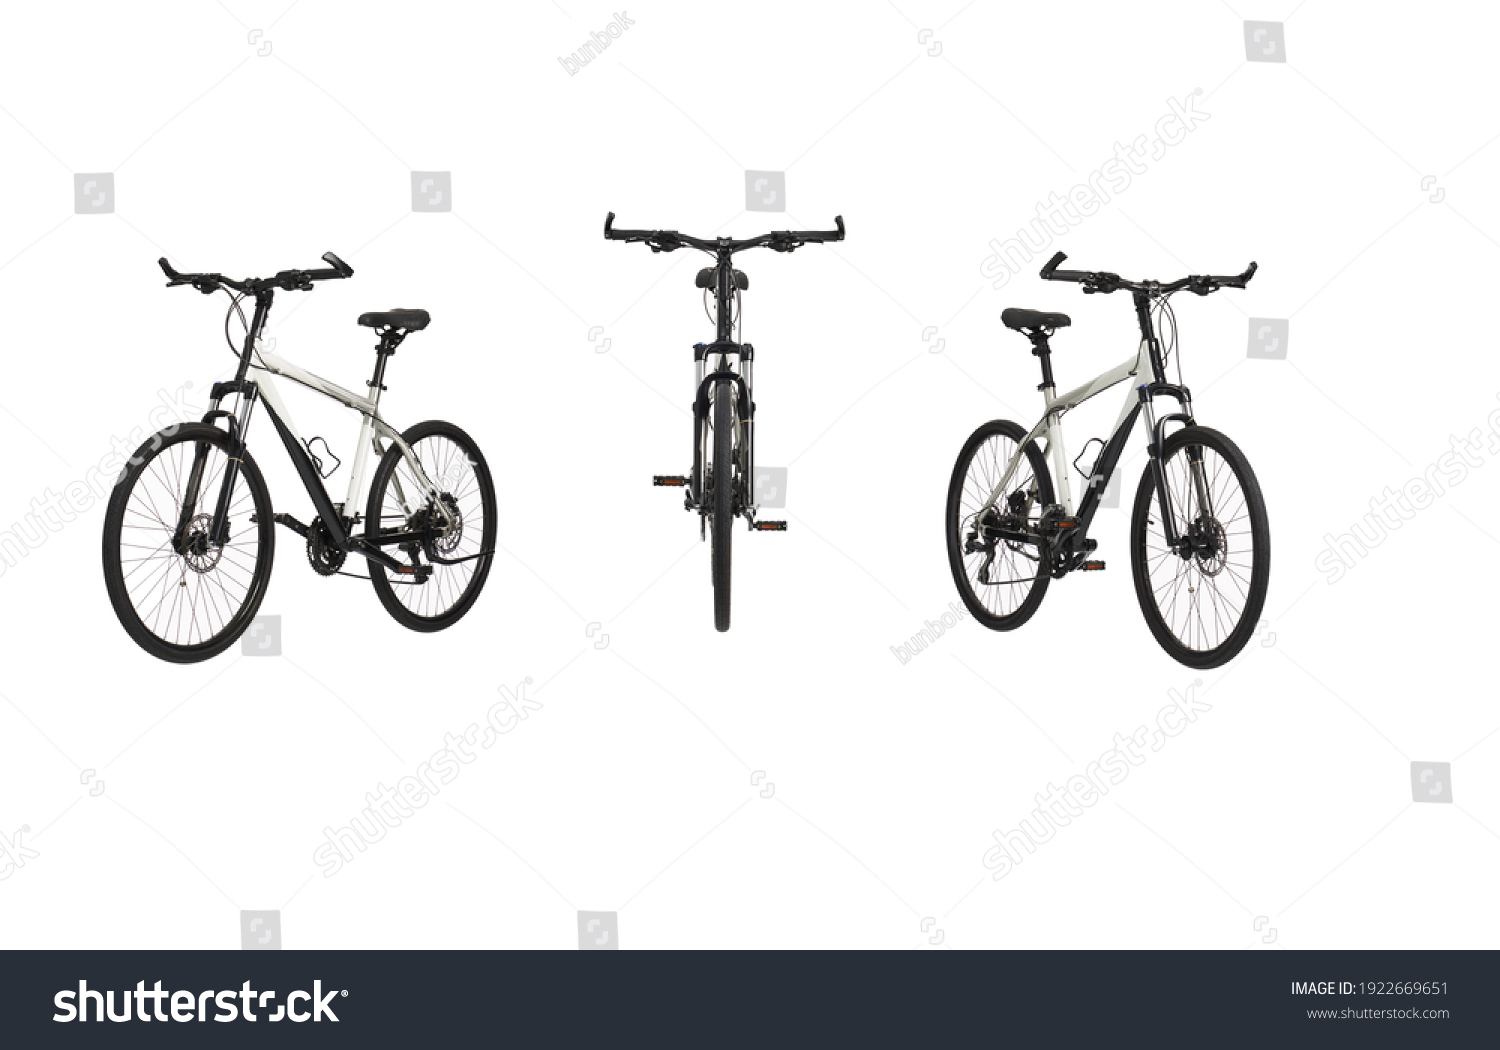 A white mountain bike isolated before white background.Many choices for shooting angle #1922669651